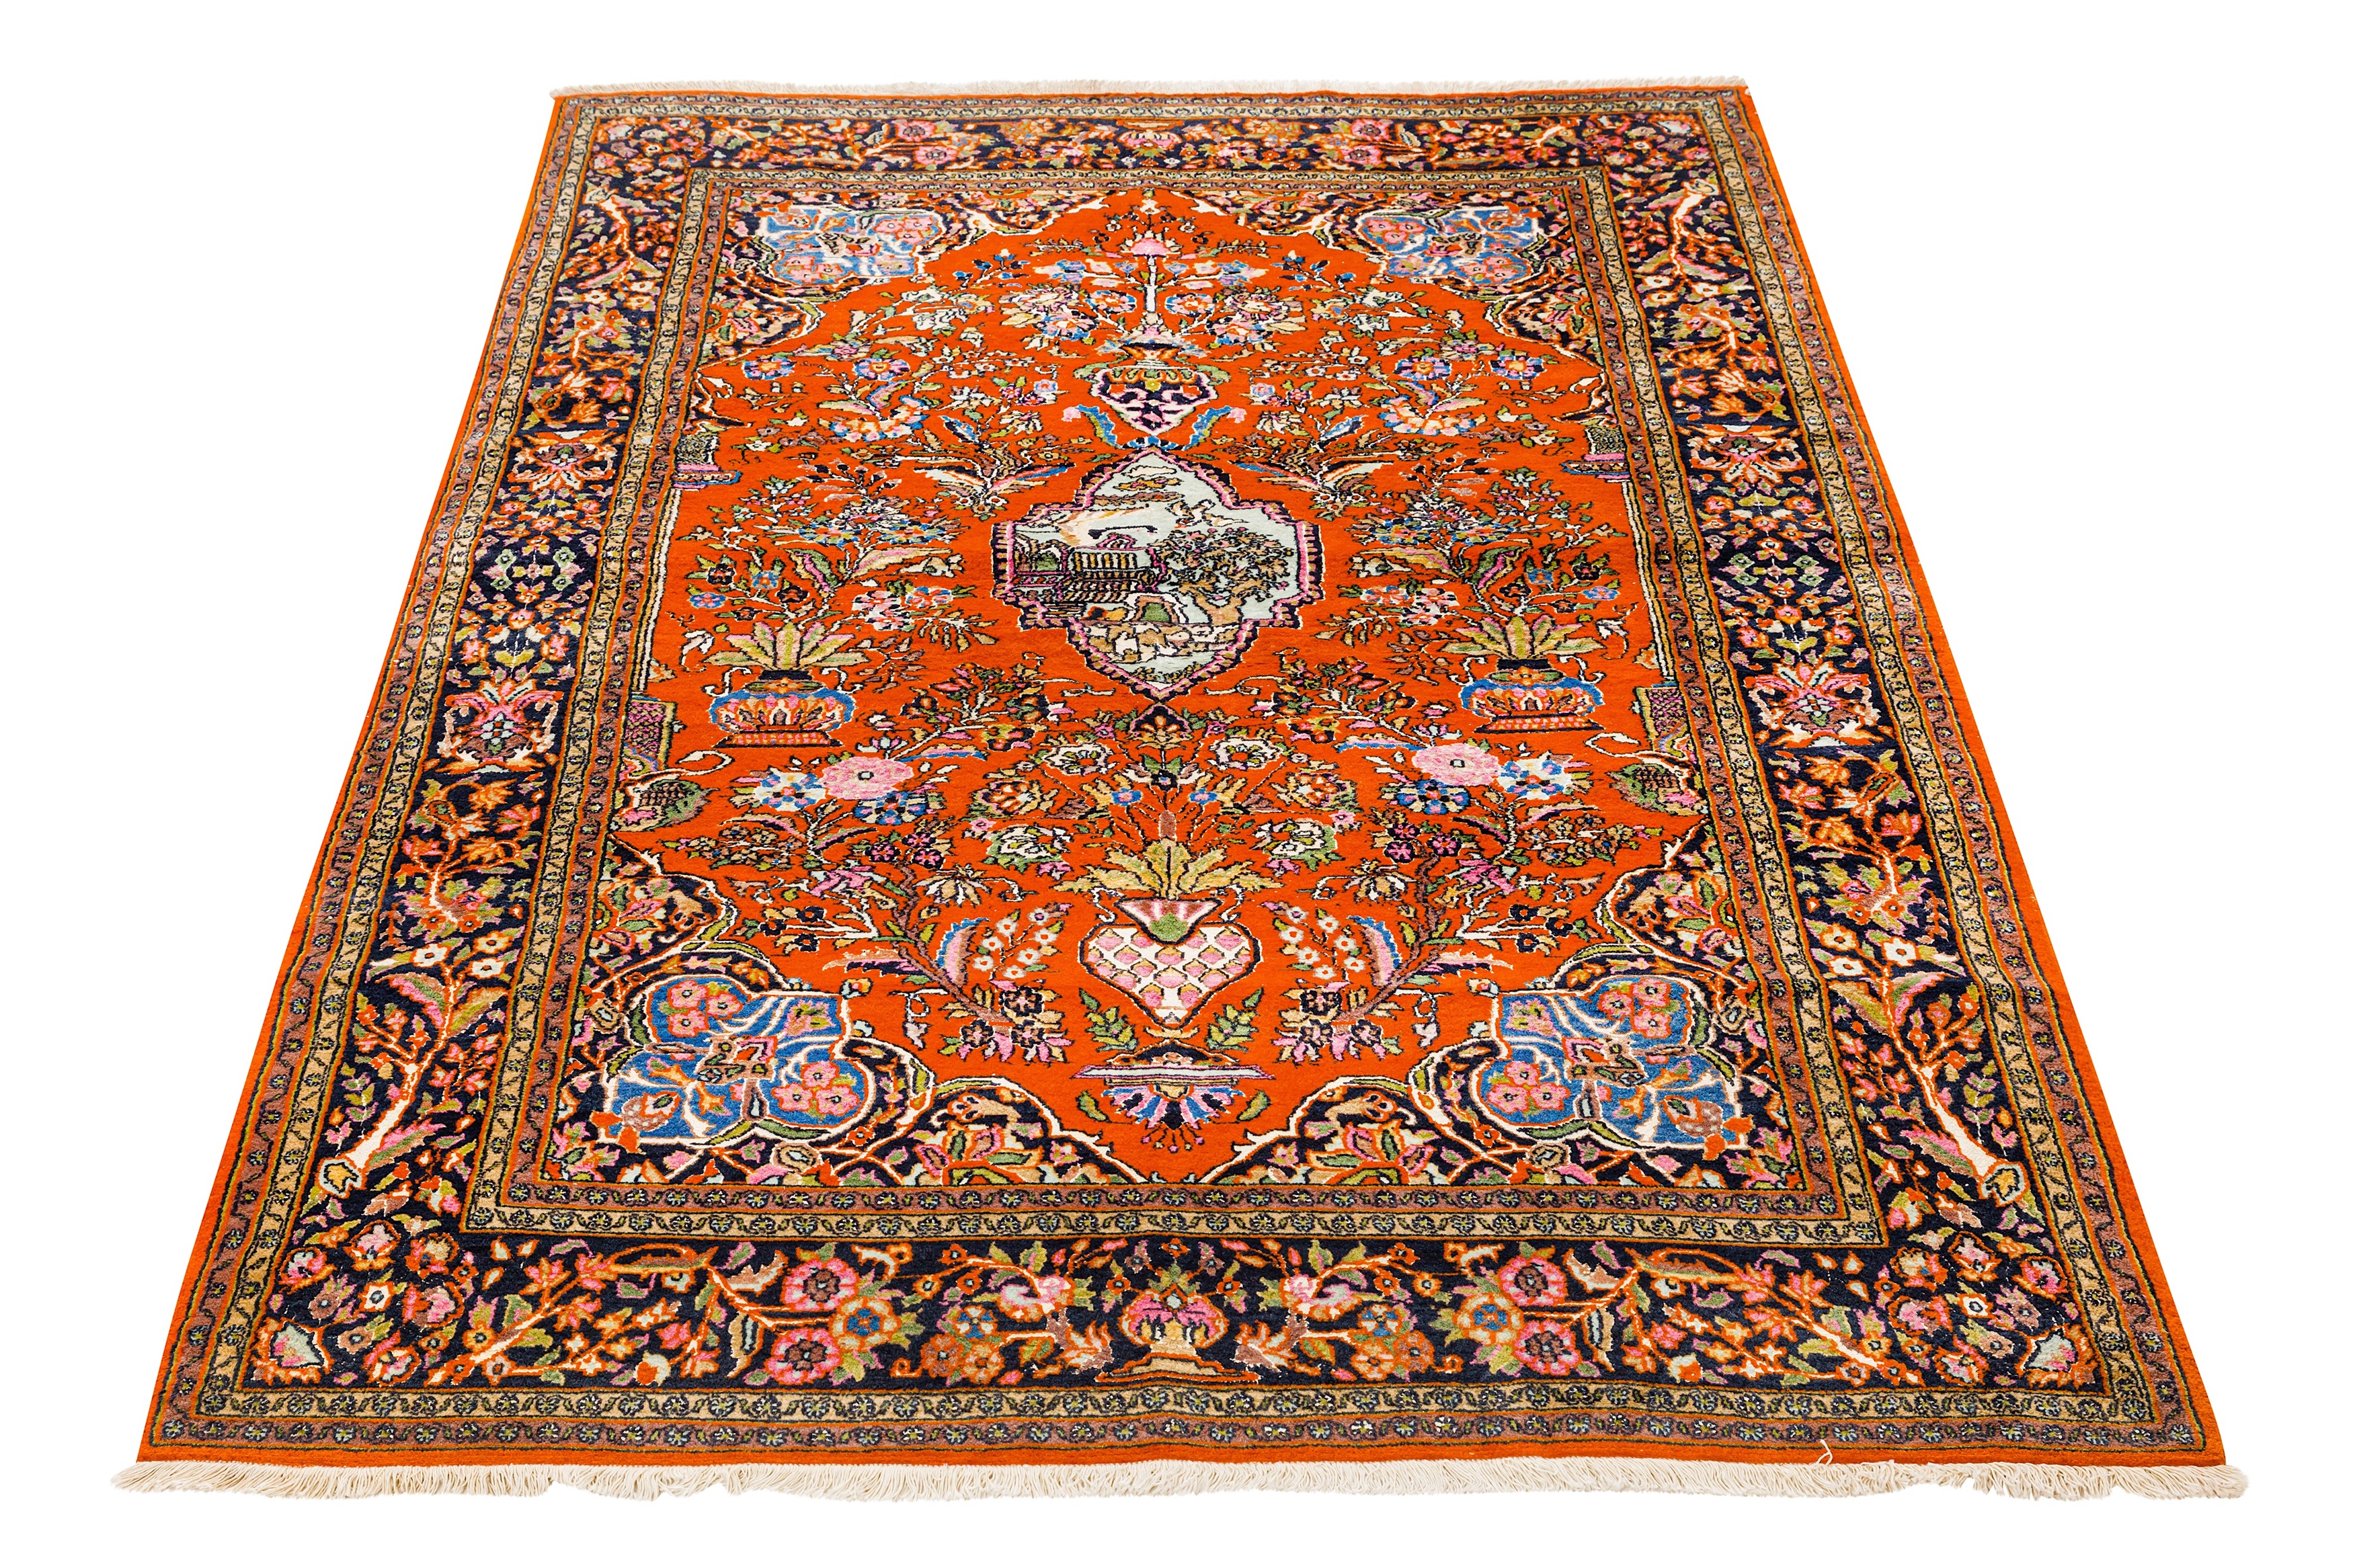 AN UNUSUAL VERY FINE PART SILK INDIAN RUG - Image 2 of 8